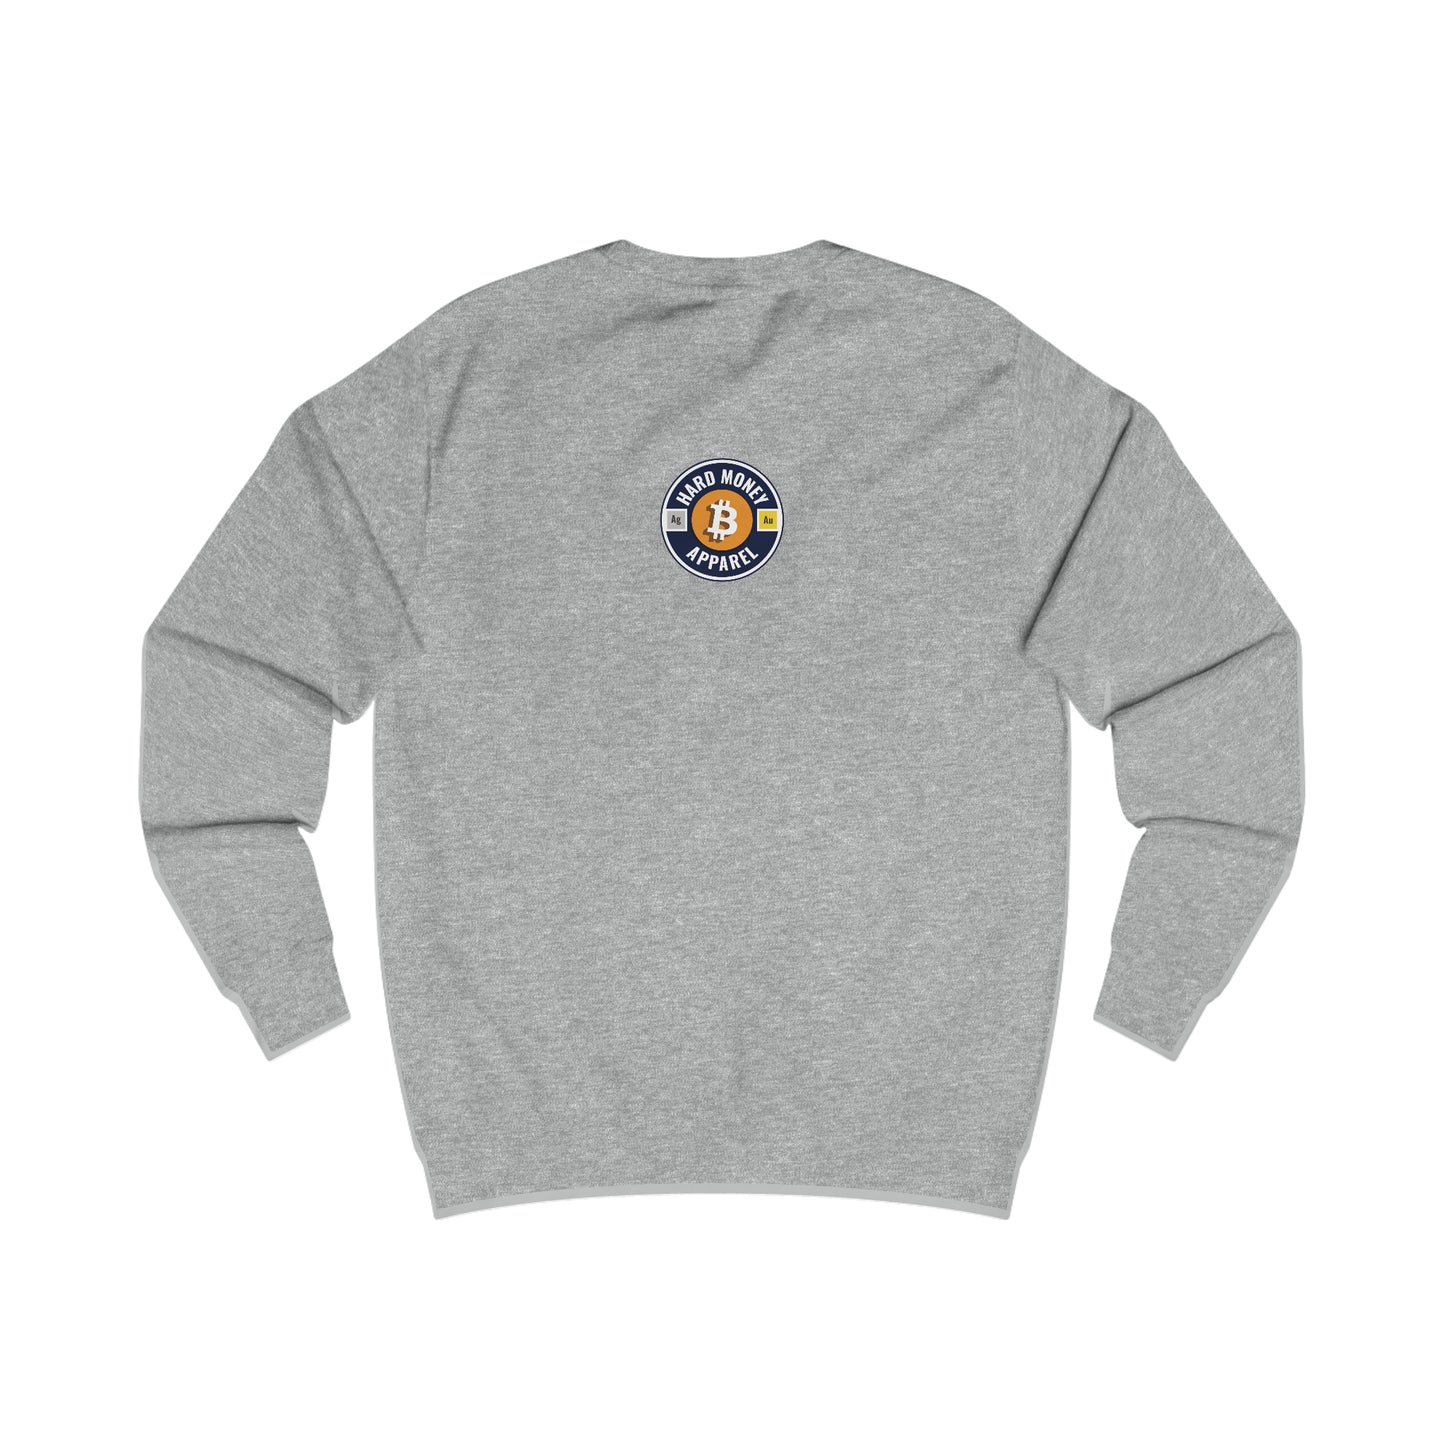 Bitcoin is Forever Fitted Crewneck Sweatshirt